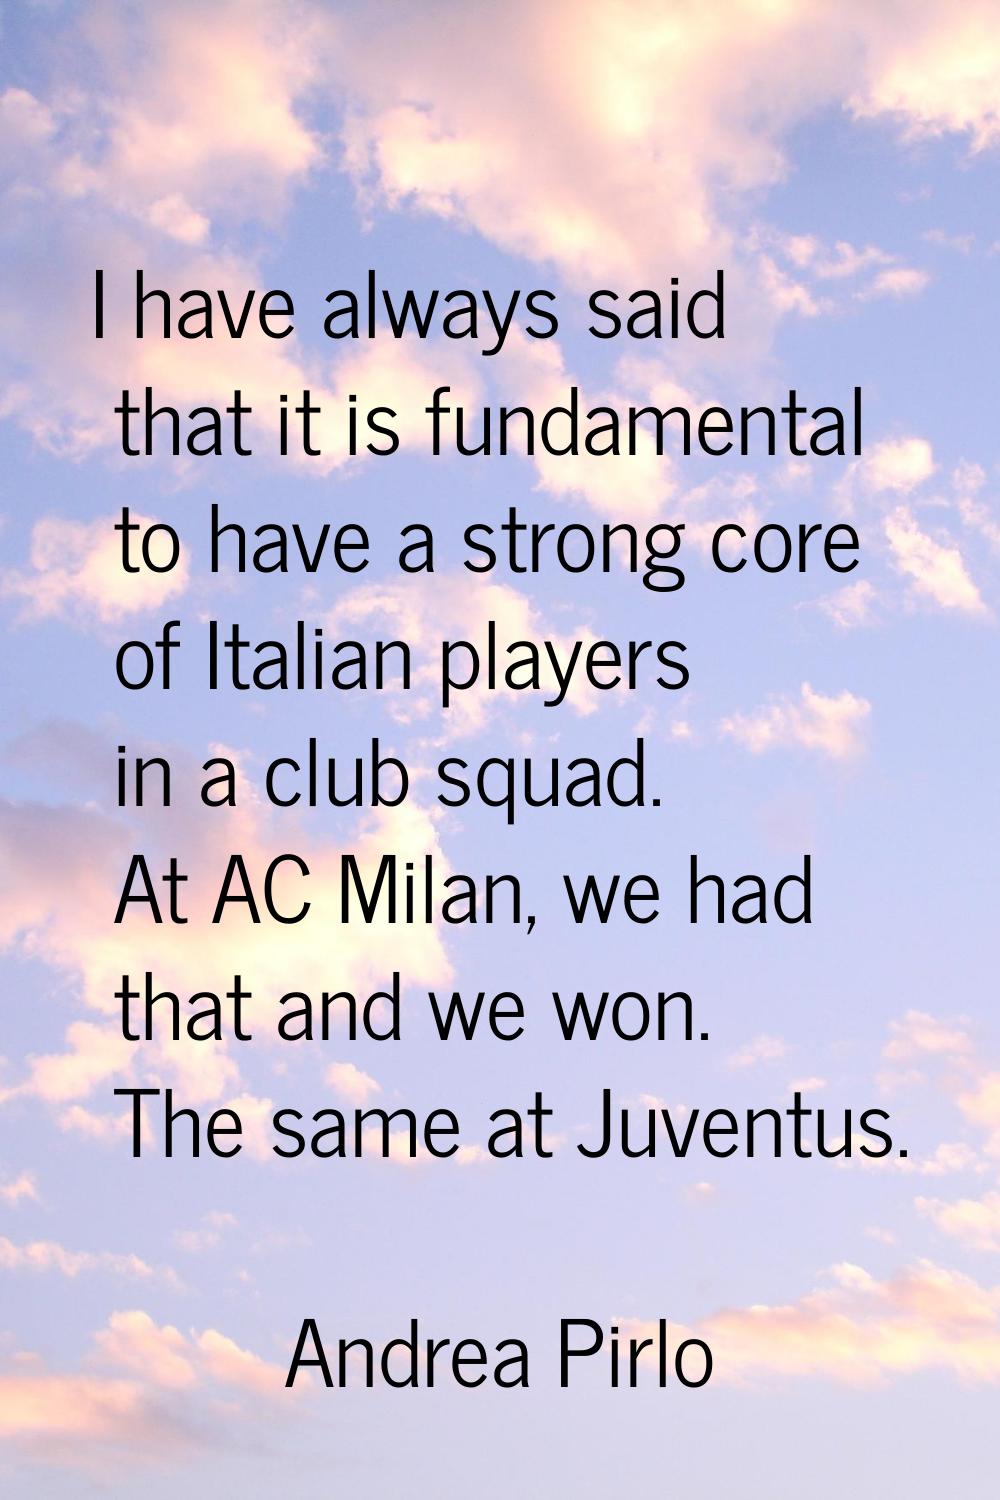 I have always said that it is fundamental to have a strong core of Italian players in a club squad.